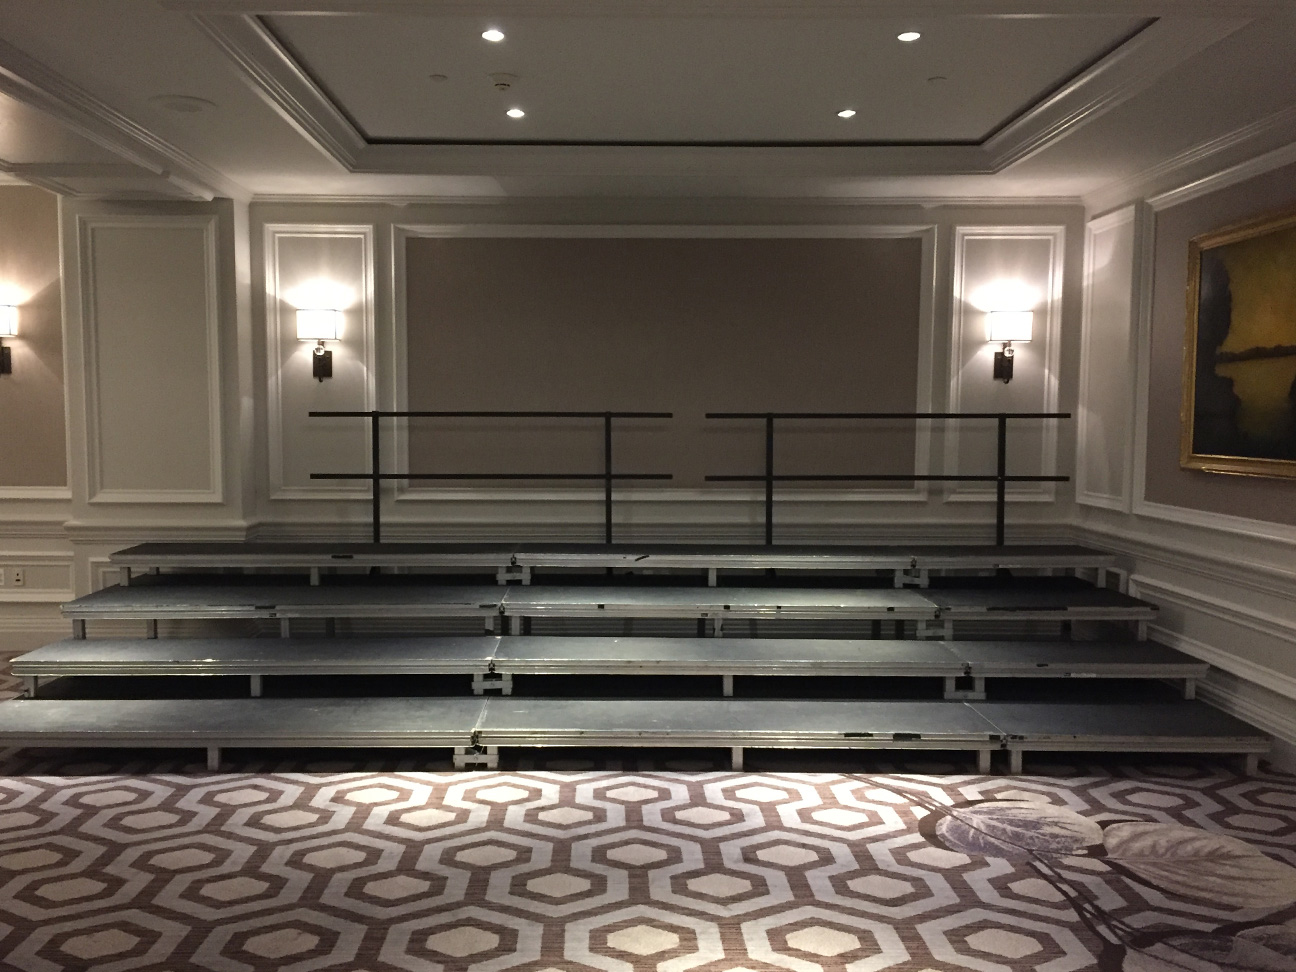 Hotel Conference Choral Risers